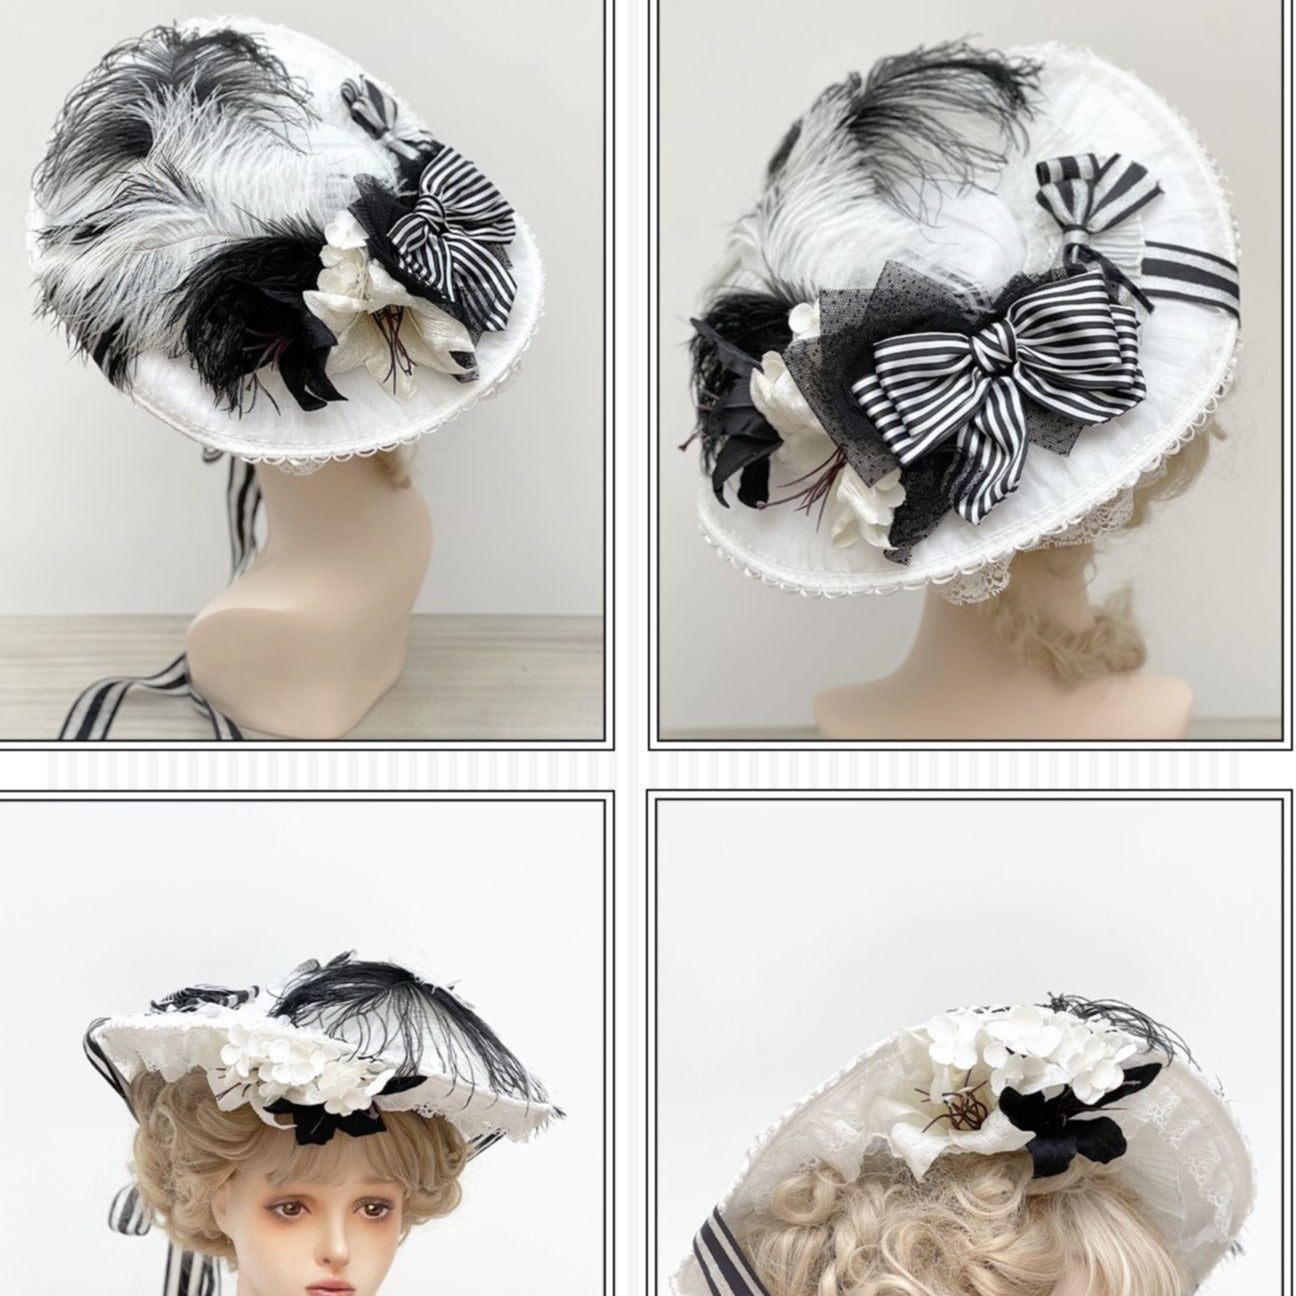 My fair lady-style striped ribbon dress and hat